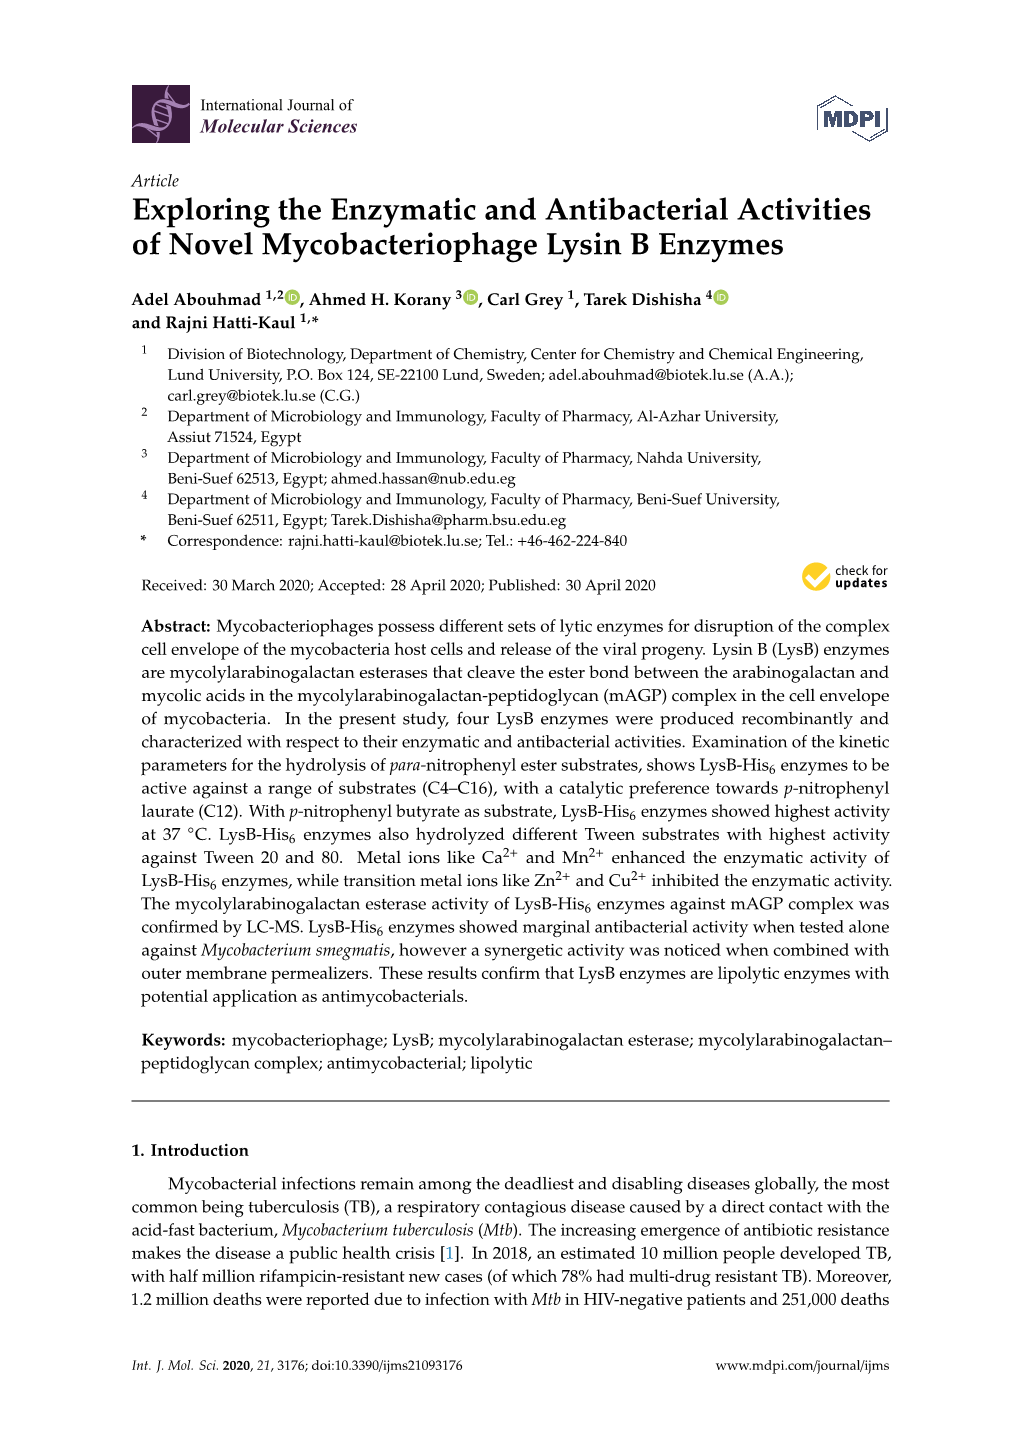 Exploring the Enzymatic and Antibacterial Activities of Novel Mycobacteriophage Lysin B Enzymes